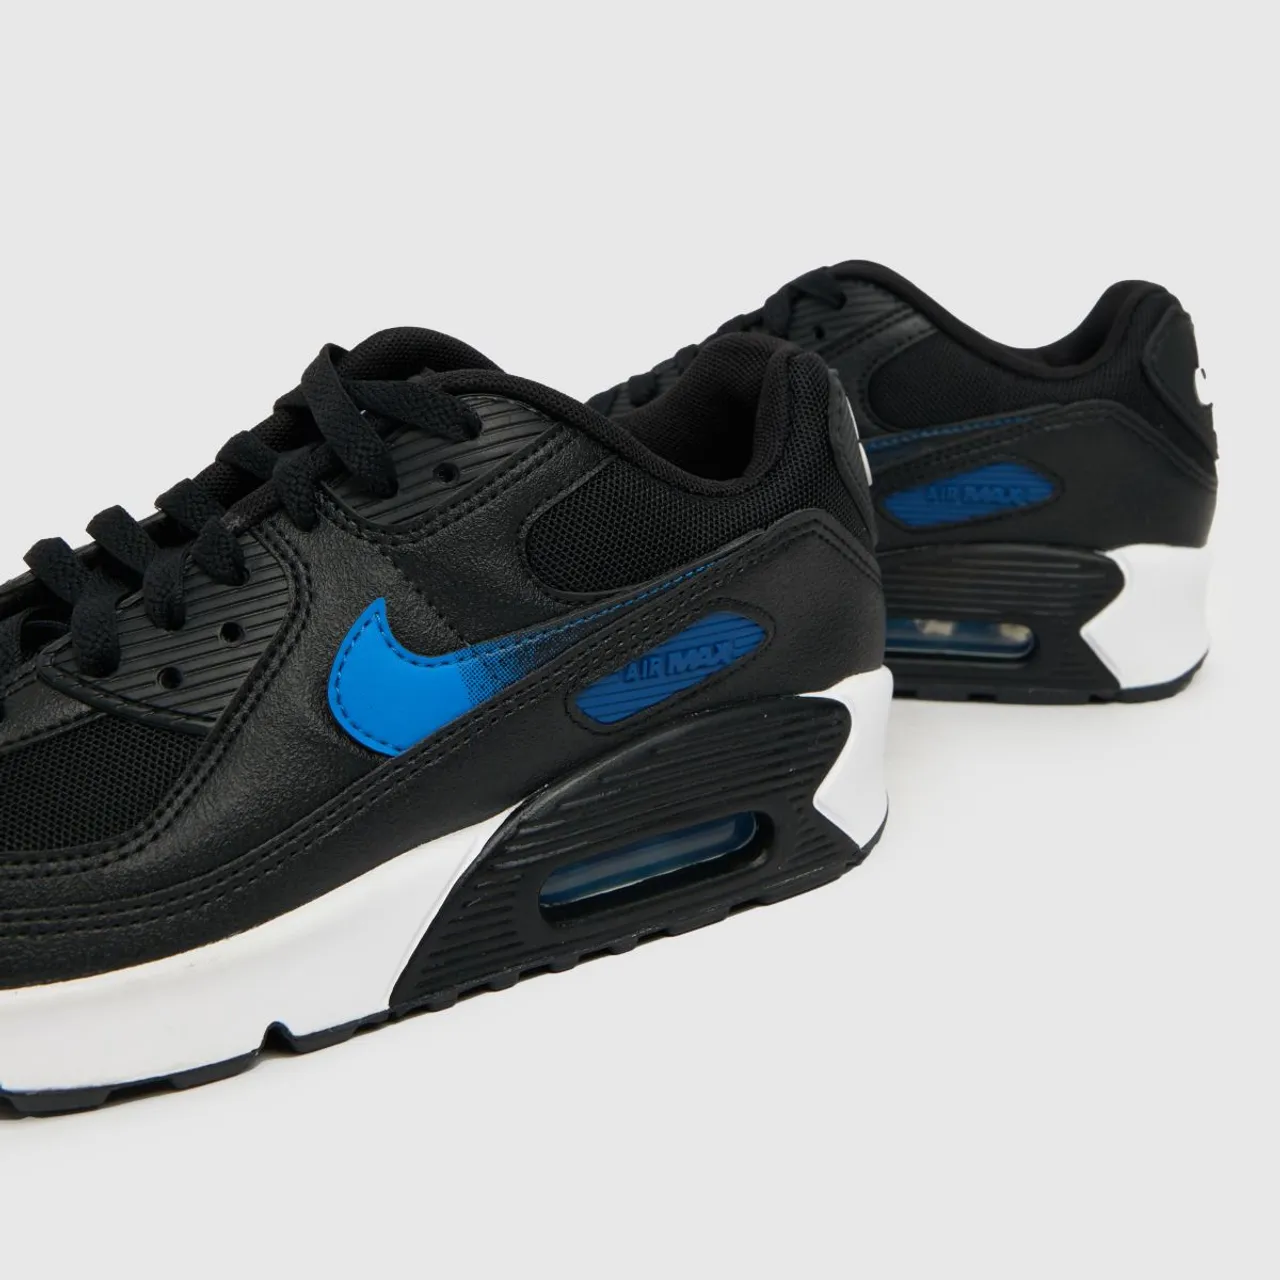 Nike Black And Blue Air Max 90 Boys Youth Trainers